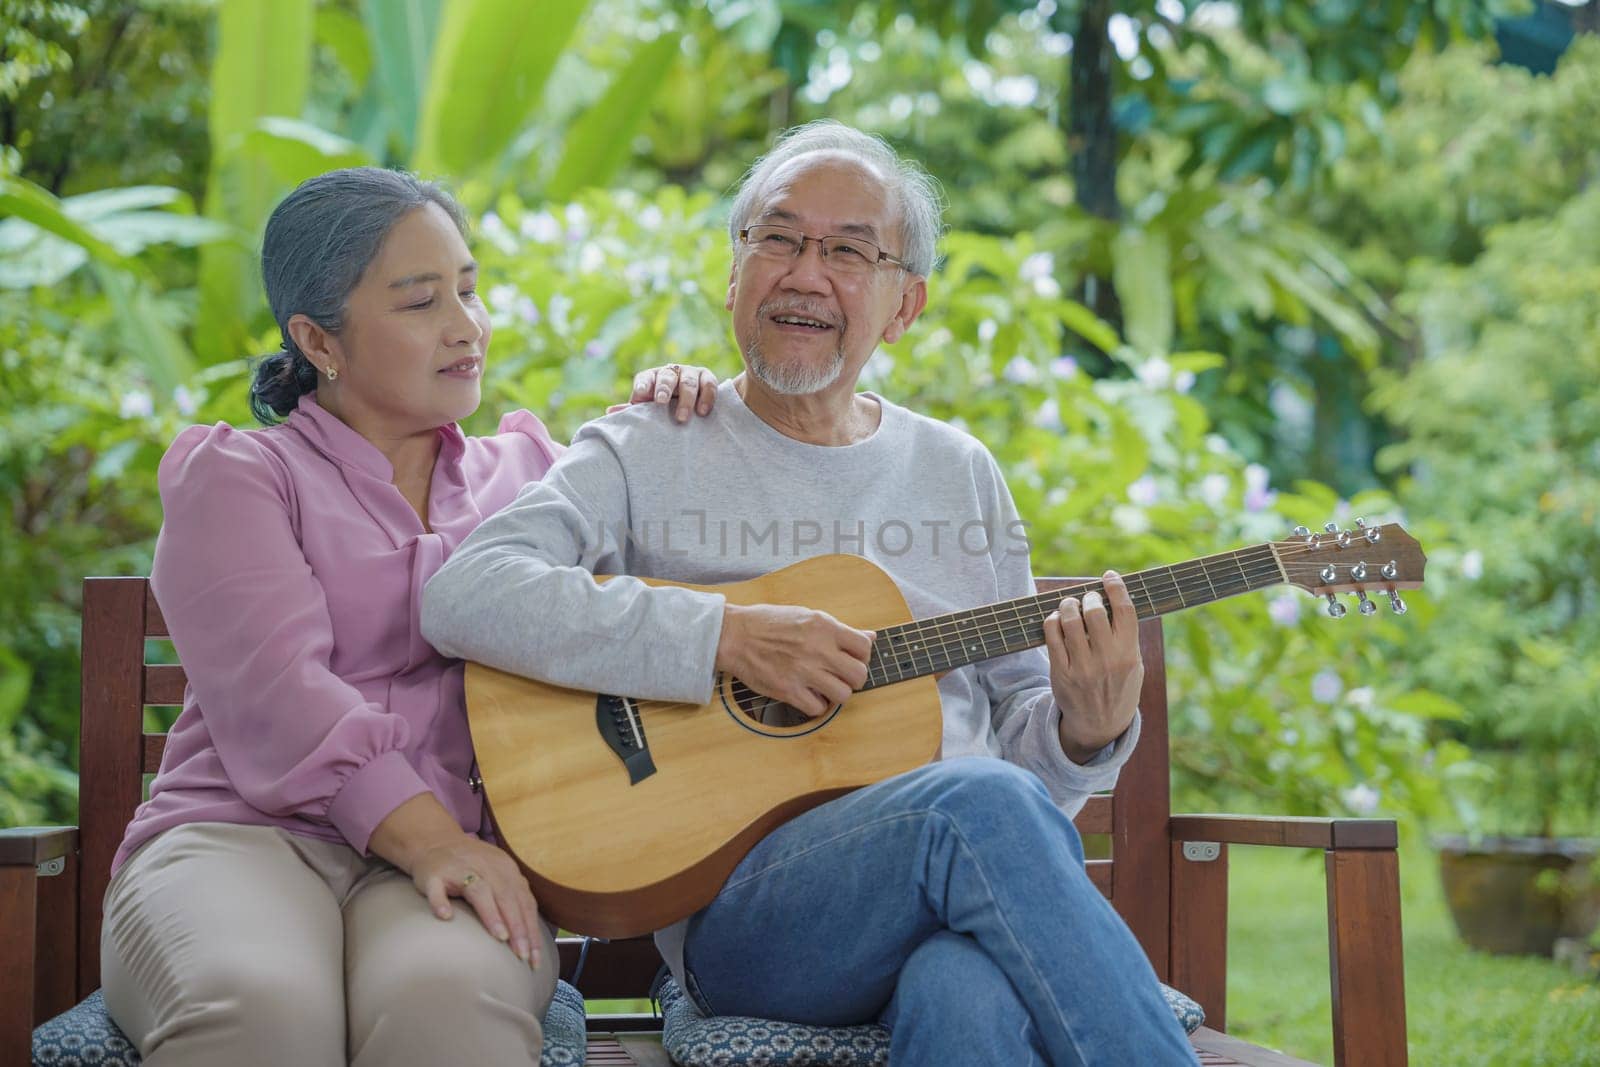 Asian senior couple elderly man playing guitar while his wife singing together outdoors at house, Activity family health care, Enjoying lifestyle during retirement life having fun of senior older